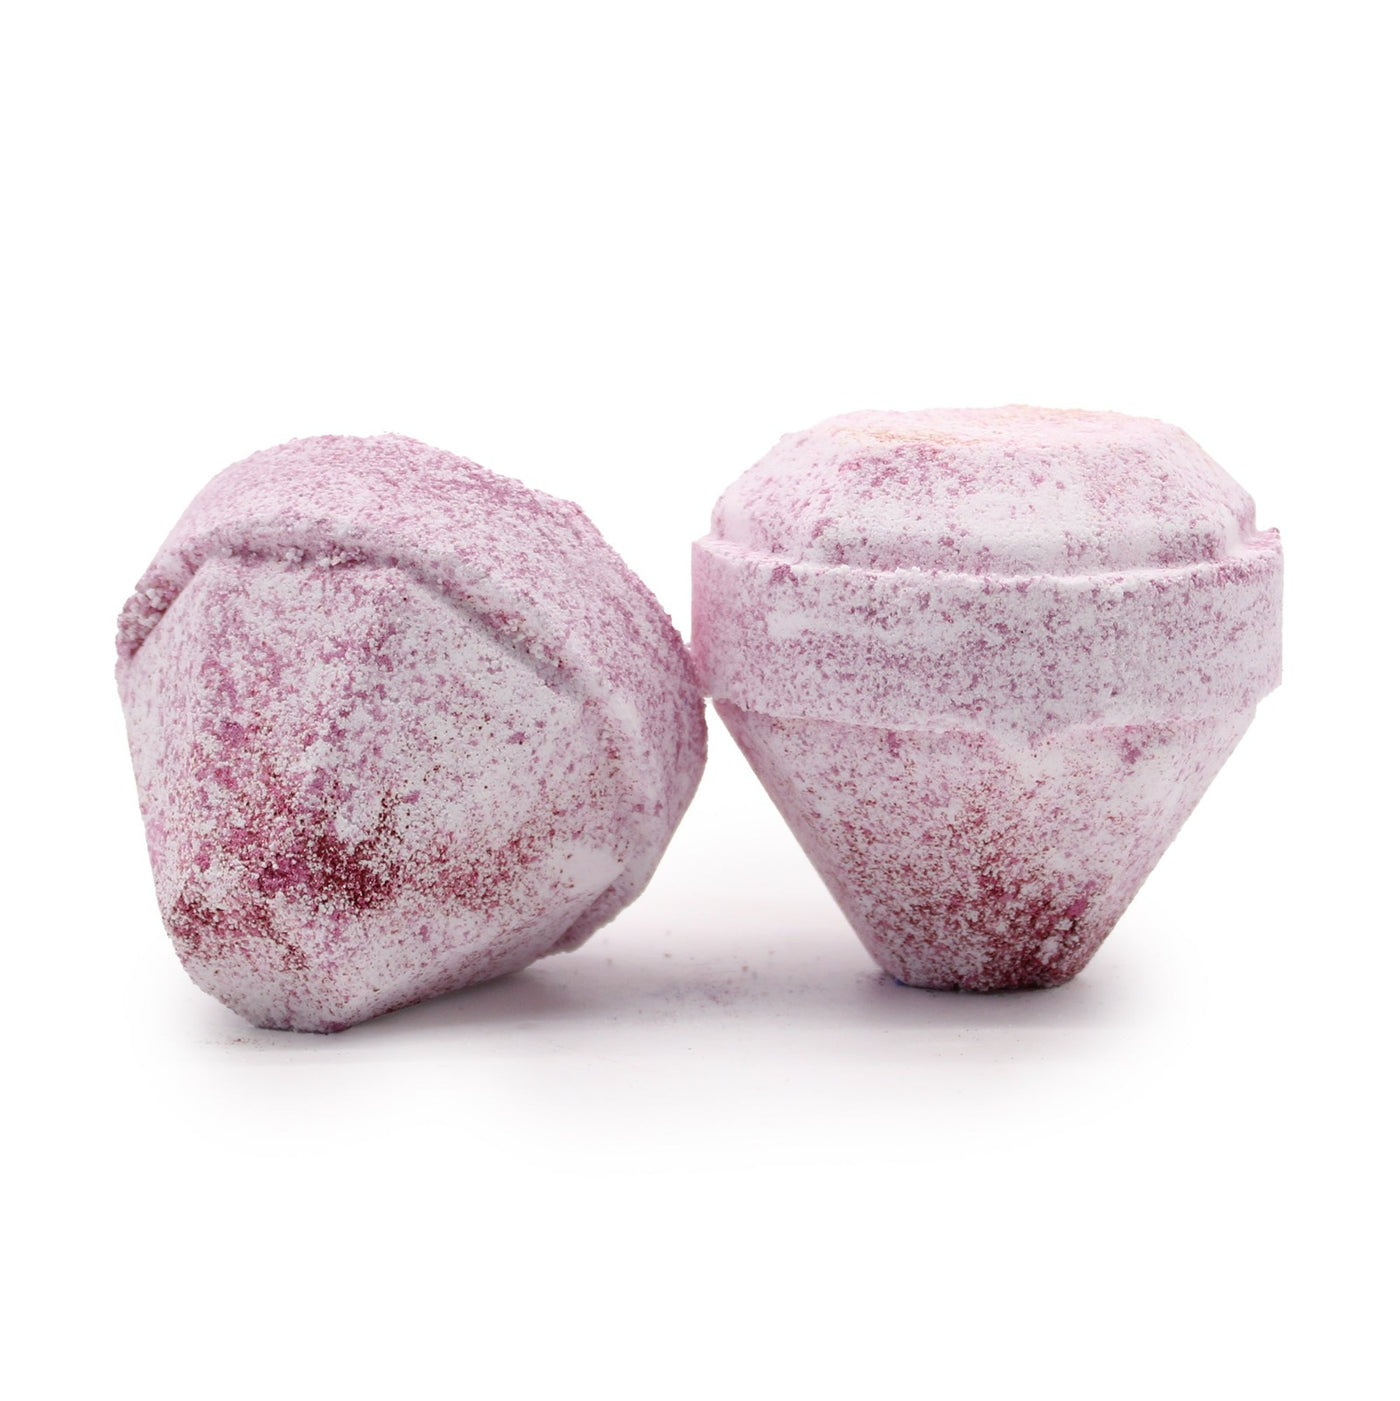 Very Berry Gemstone Bath Bomb With Eco Gemstone Surprise And Eco Glitter.